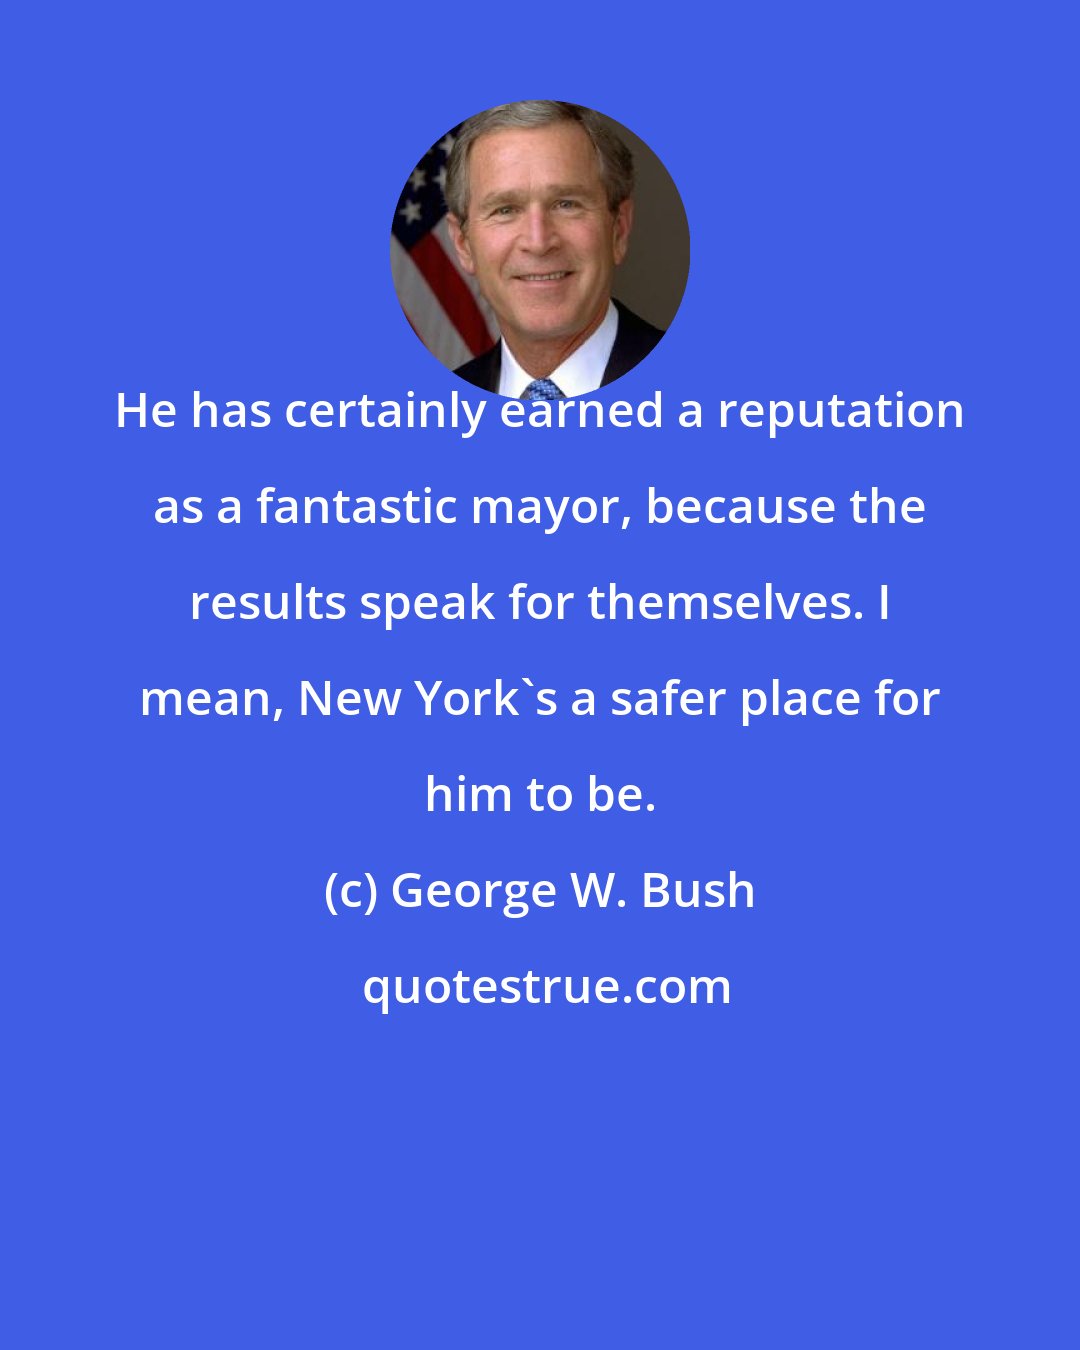 George W. Bush: He has certainly earned a reputation as a fantastic mayor, because the results speak for themselves. I mean, New York's a safer place for him to be.